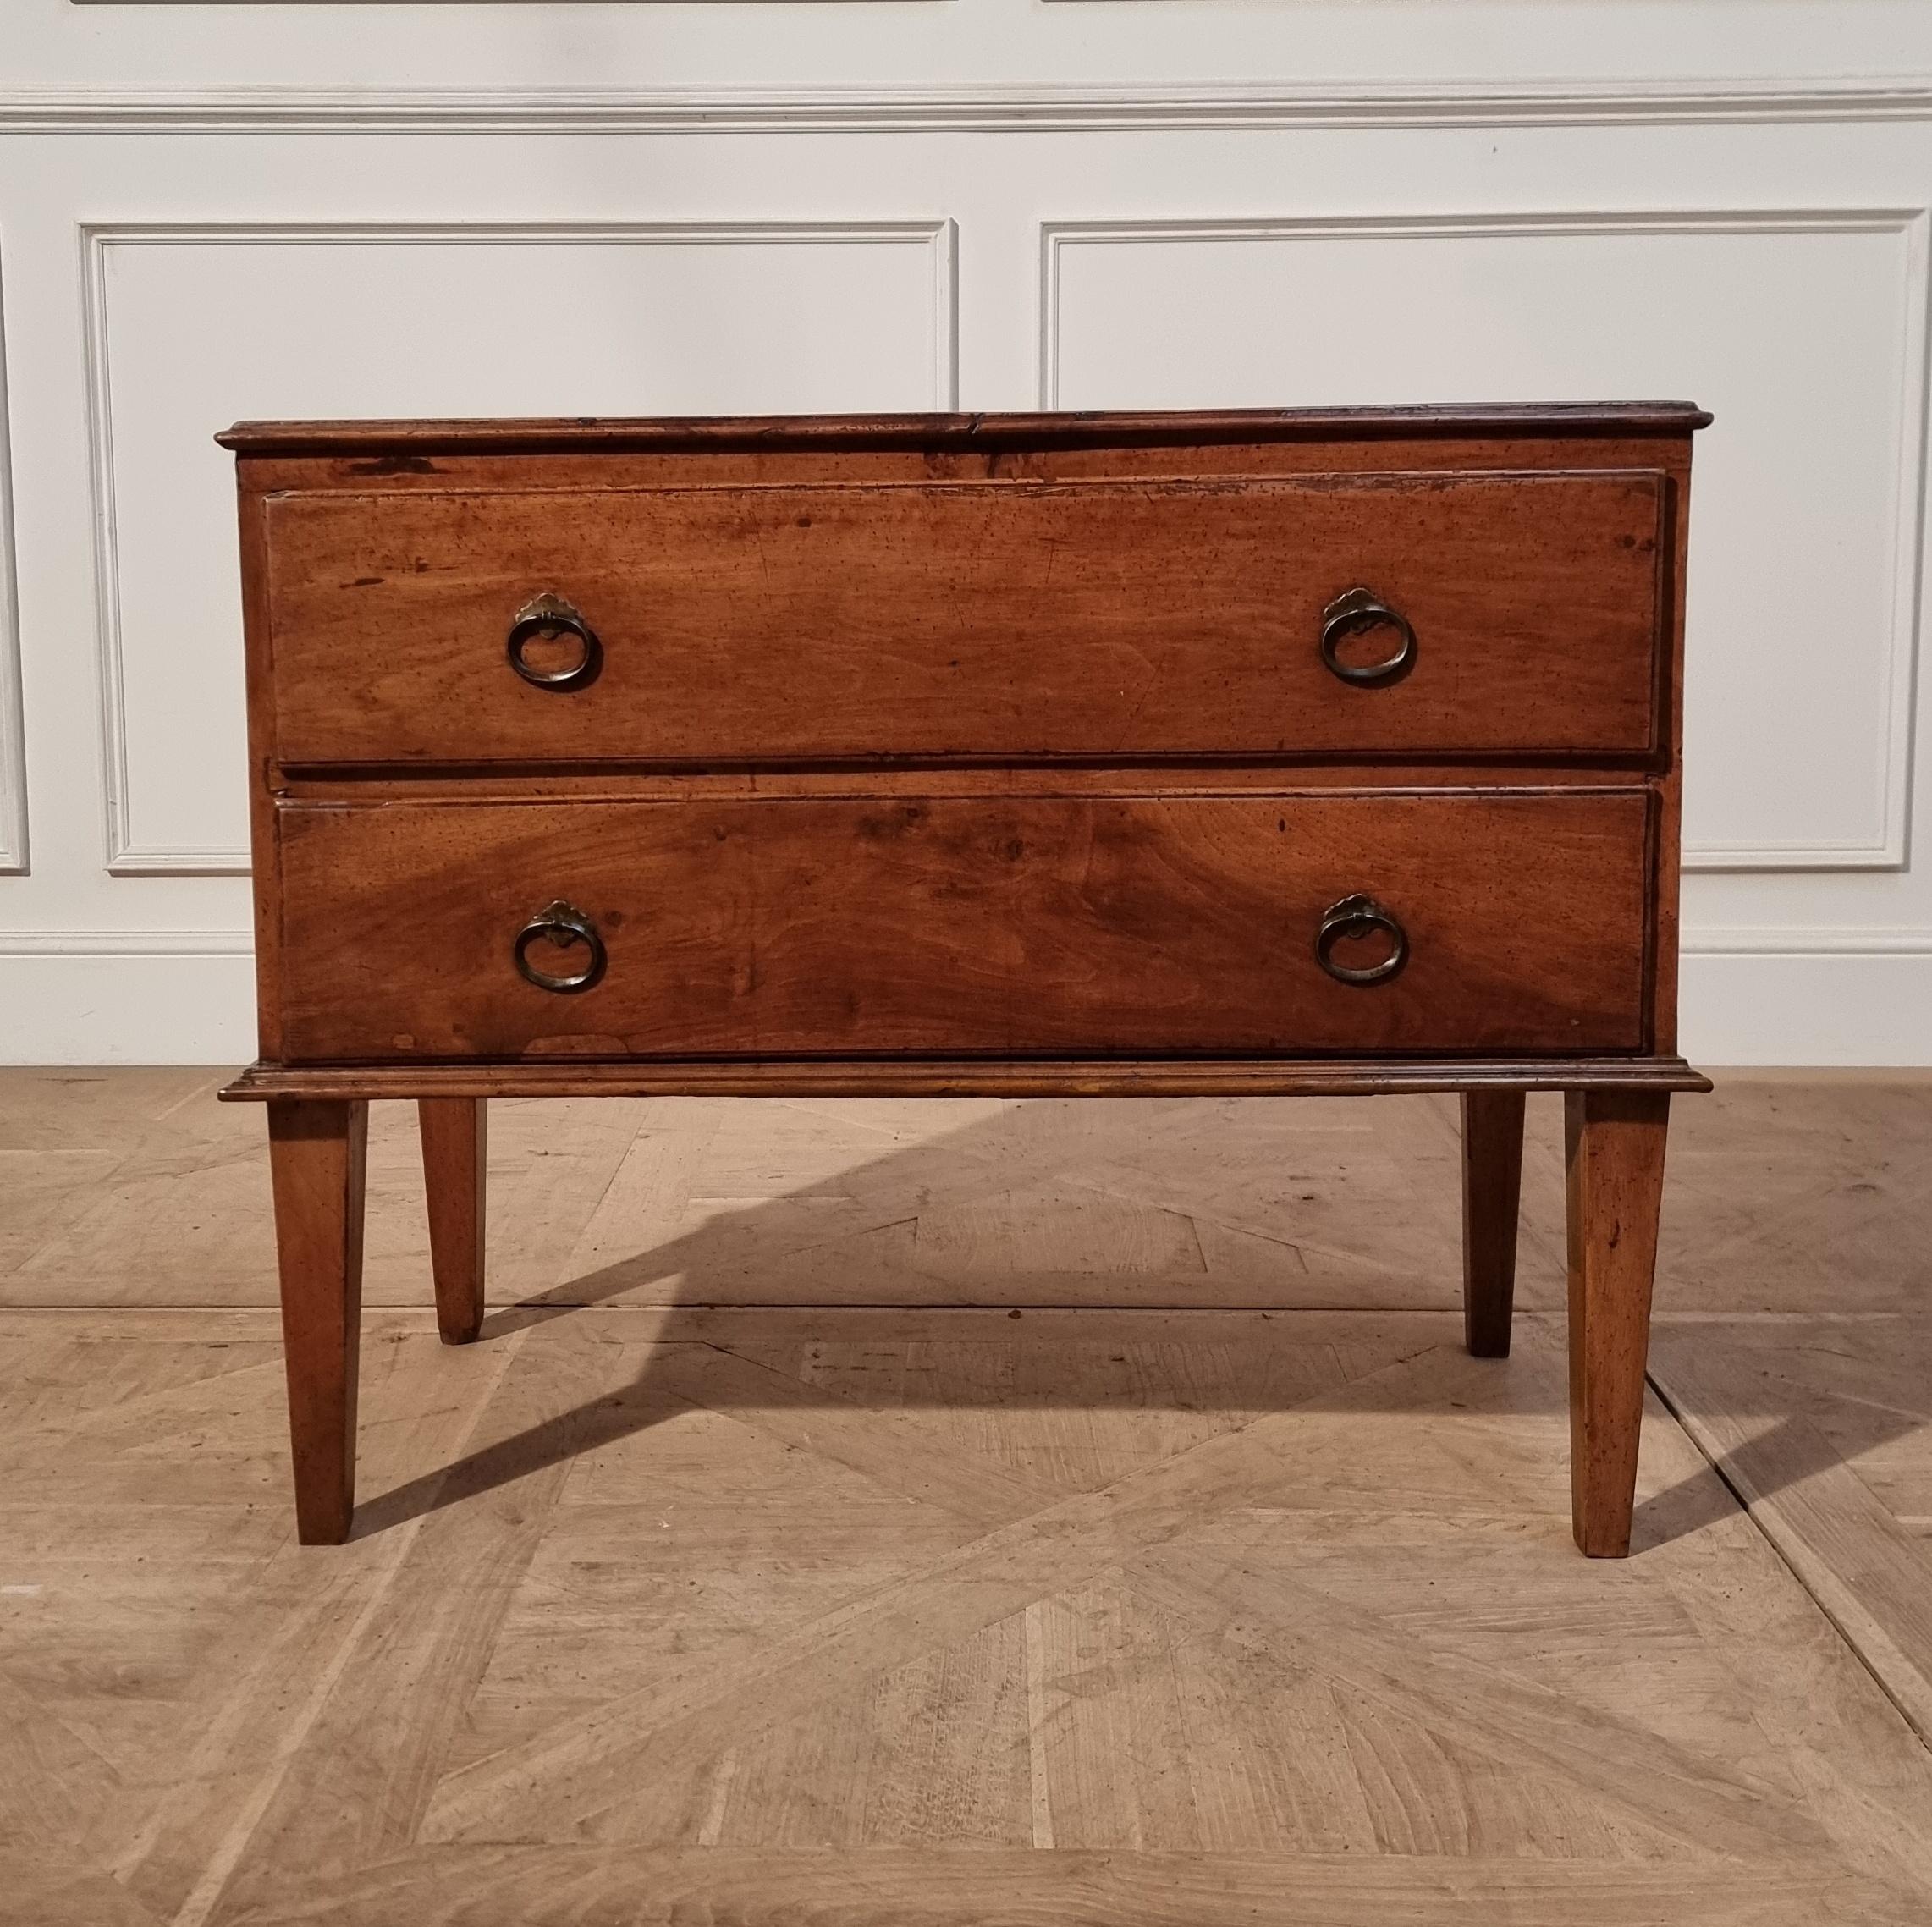 Early 19th C Italian walnut 2 drawer commode. Good colour. 1820.

Reference: 7655

Dimensions
37 inches (94 cms) Wide
17.5 inches (44 cms) Deep
30 inches (76 cms) High